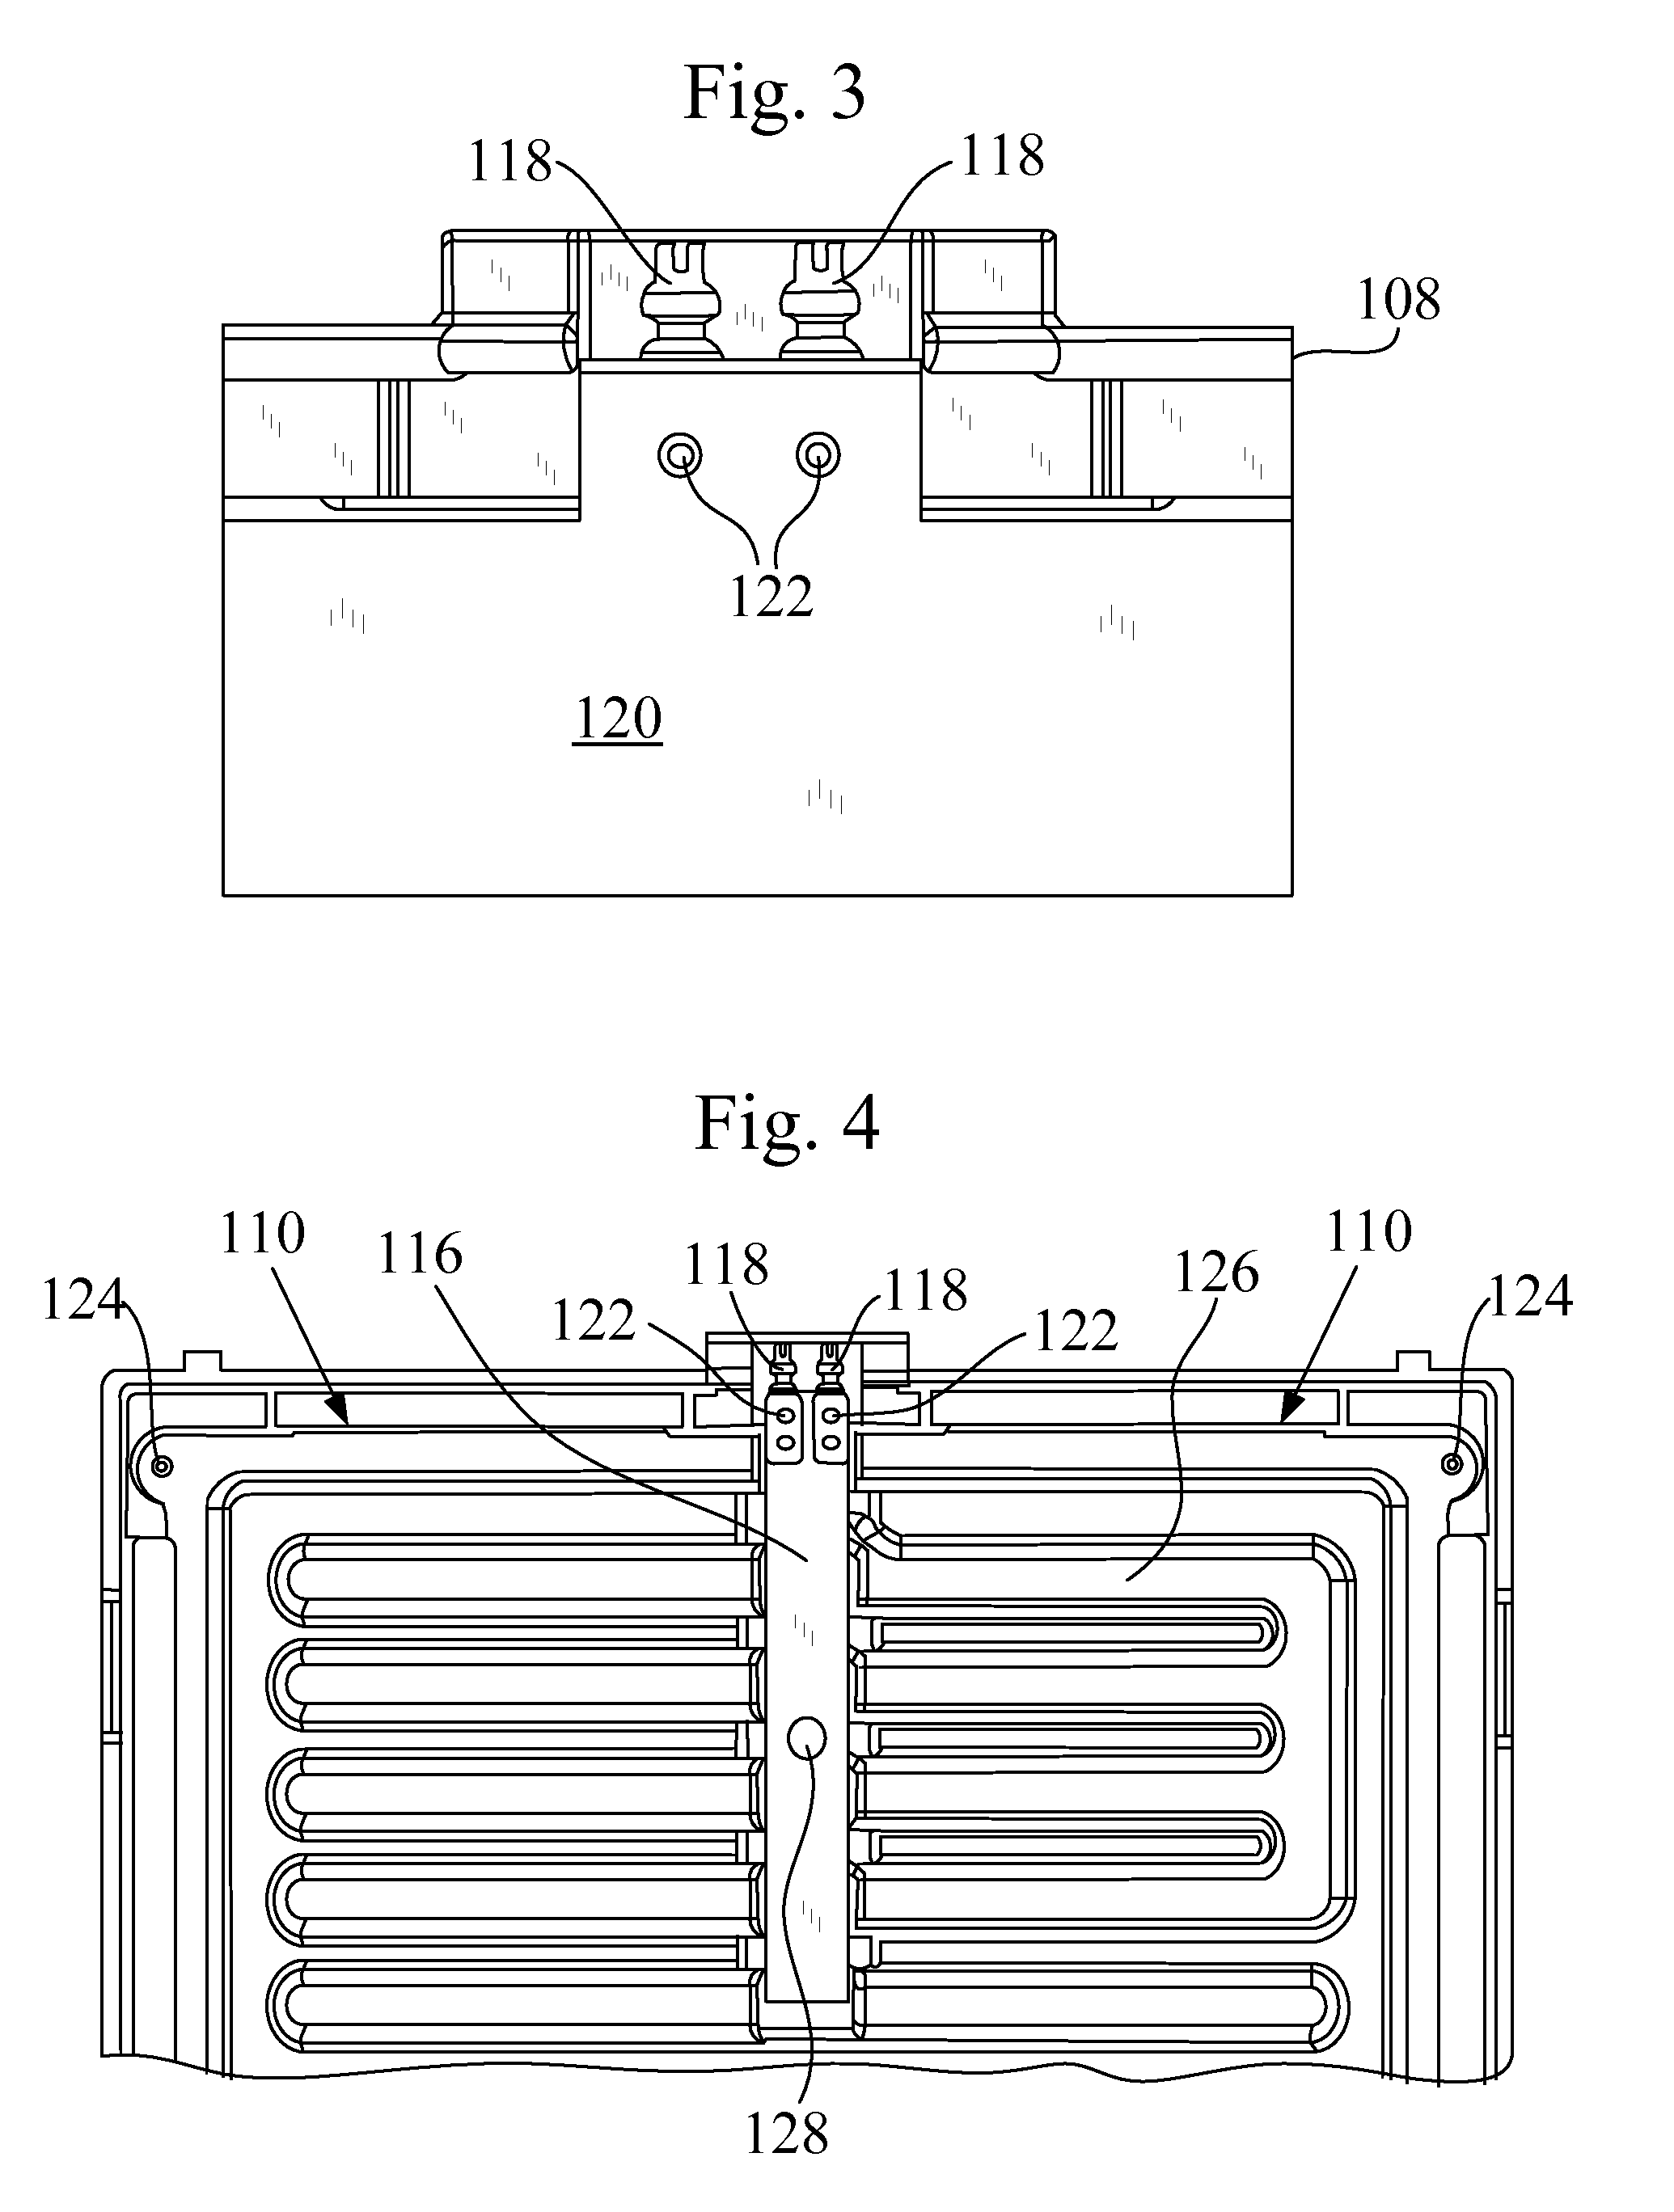 Temperature sensor mounting arrangement for a battery frame assembly